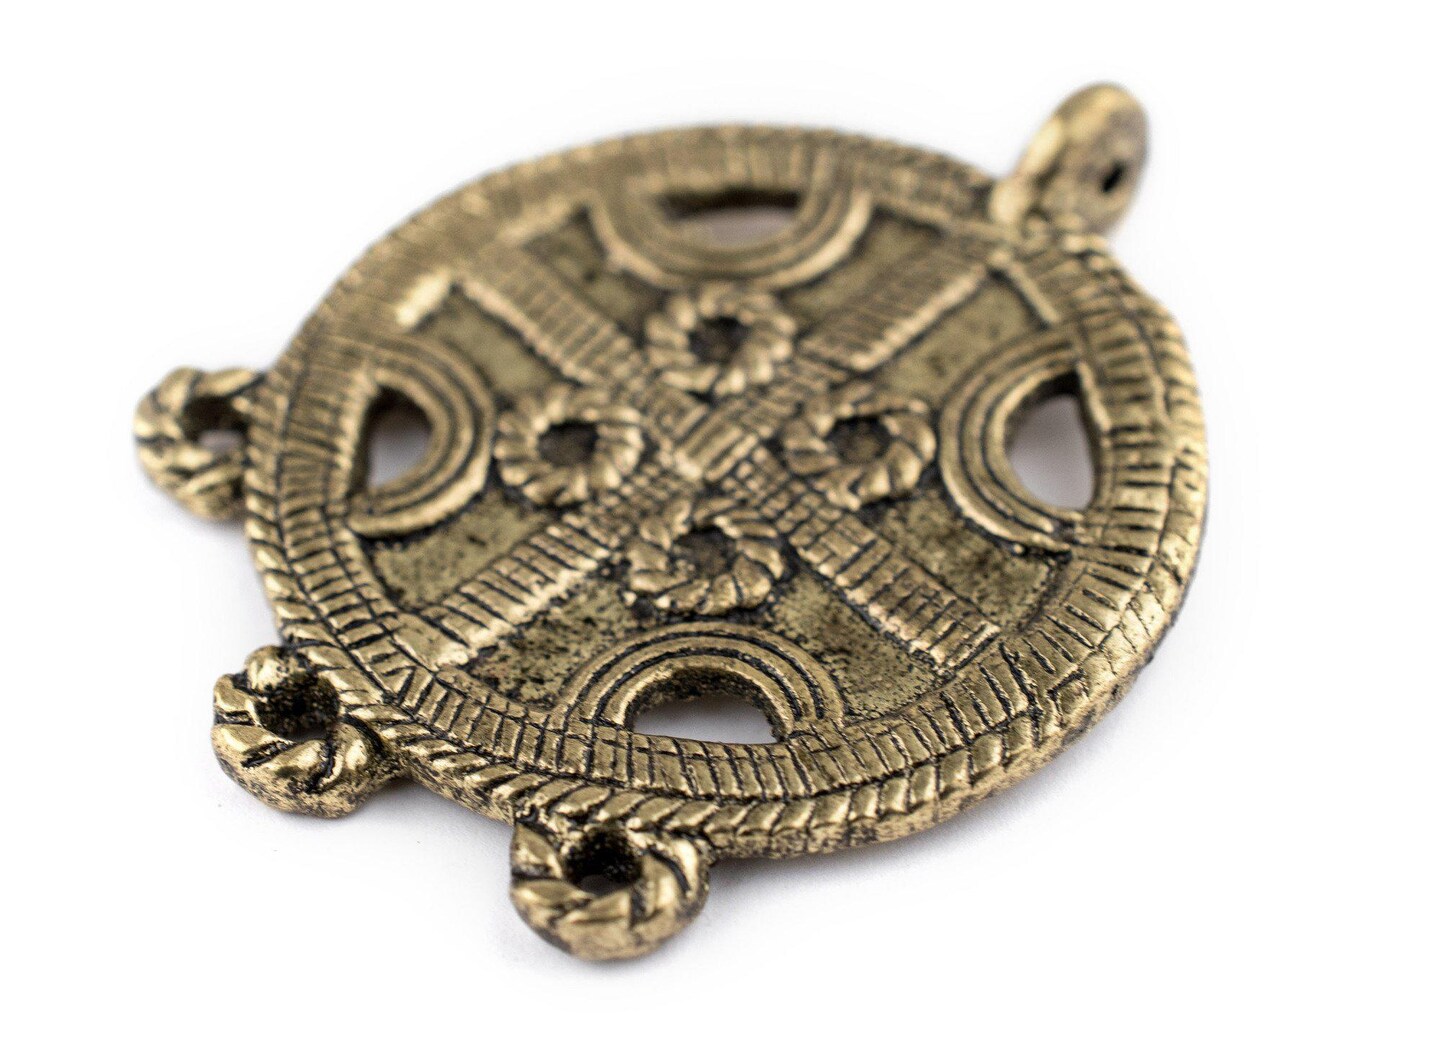 TheBeadChest Brass Circular Cross Tribal Baule Connector Pendant (39x50mm): African Tribal Metal Pendant for DIY Jewelry and Necklace